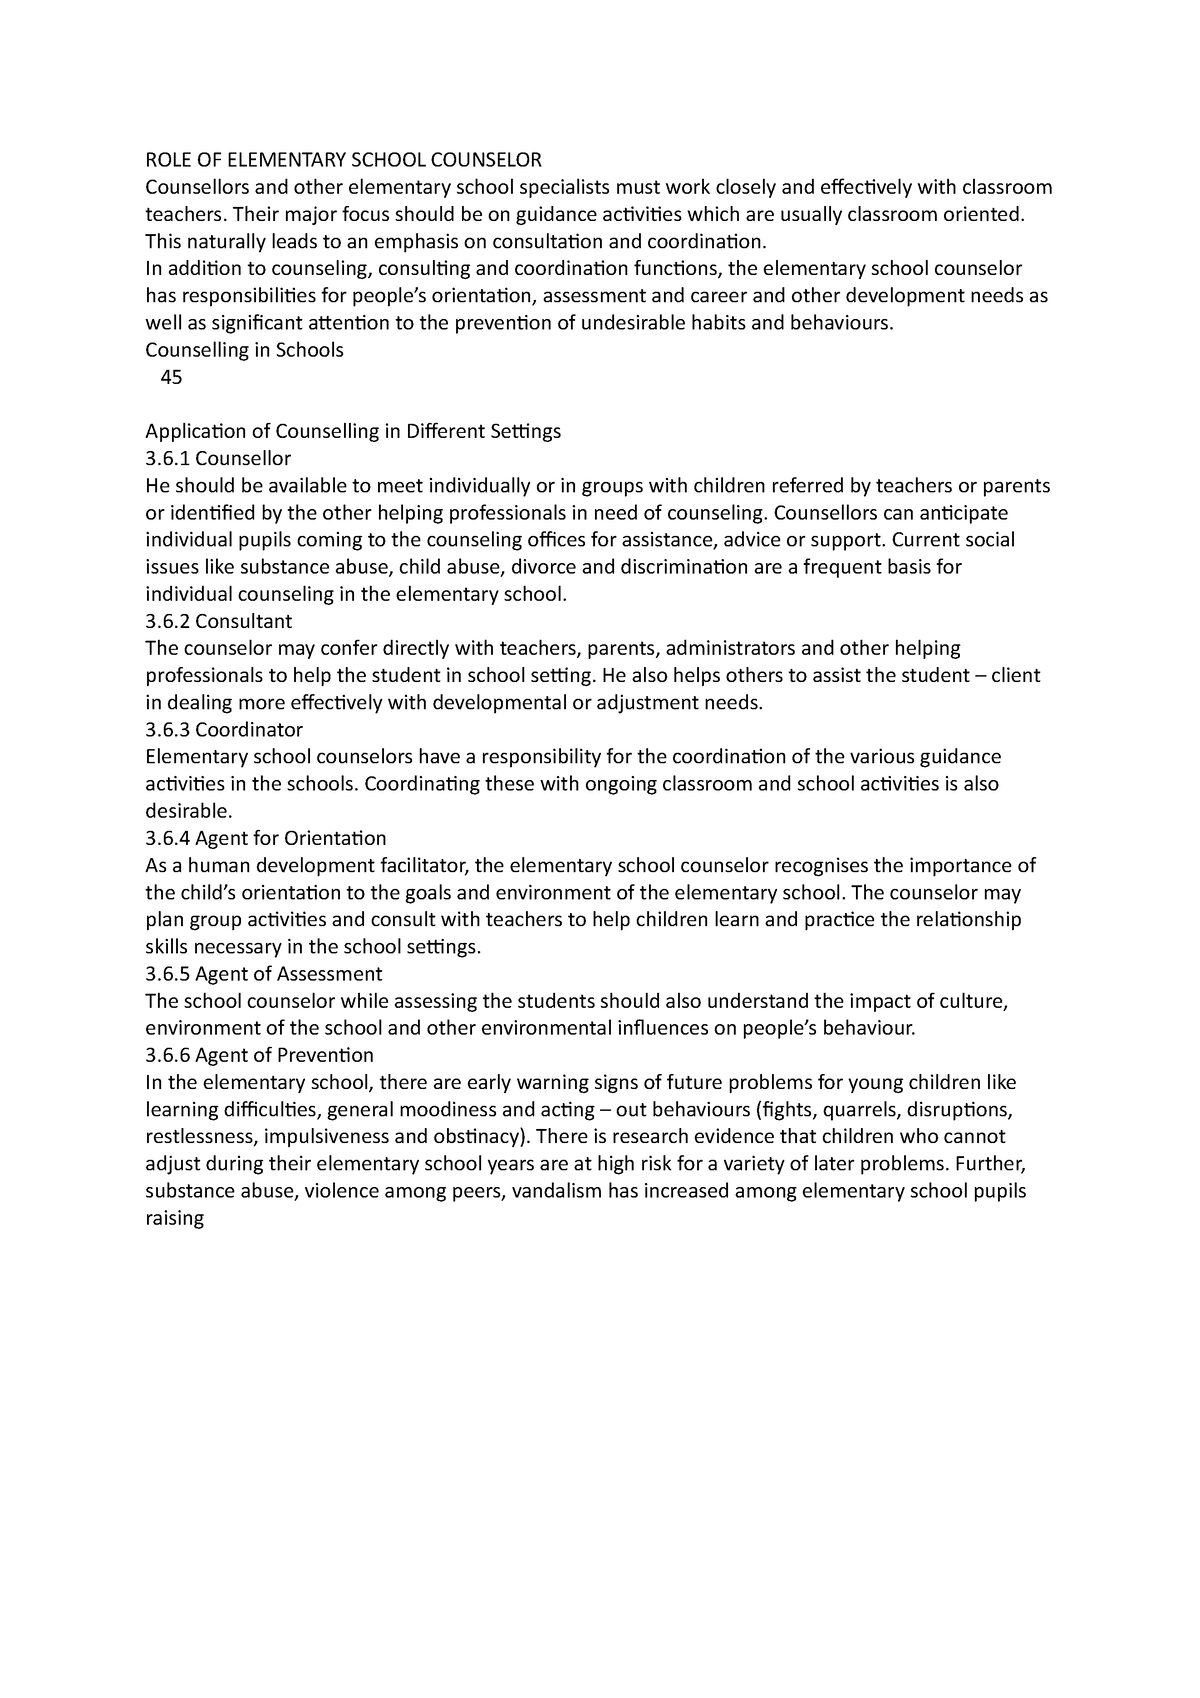 Roles of elementary school counsellor - ROLE OF ELEMENTARY SCHOOL ...